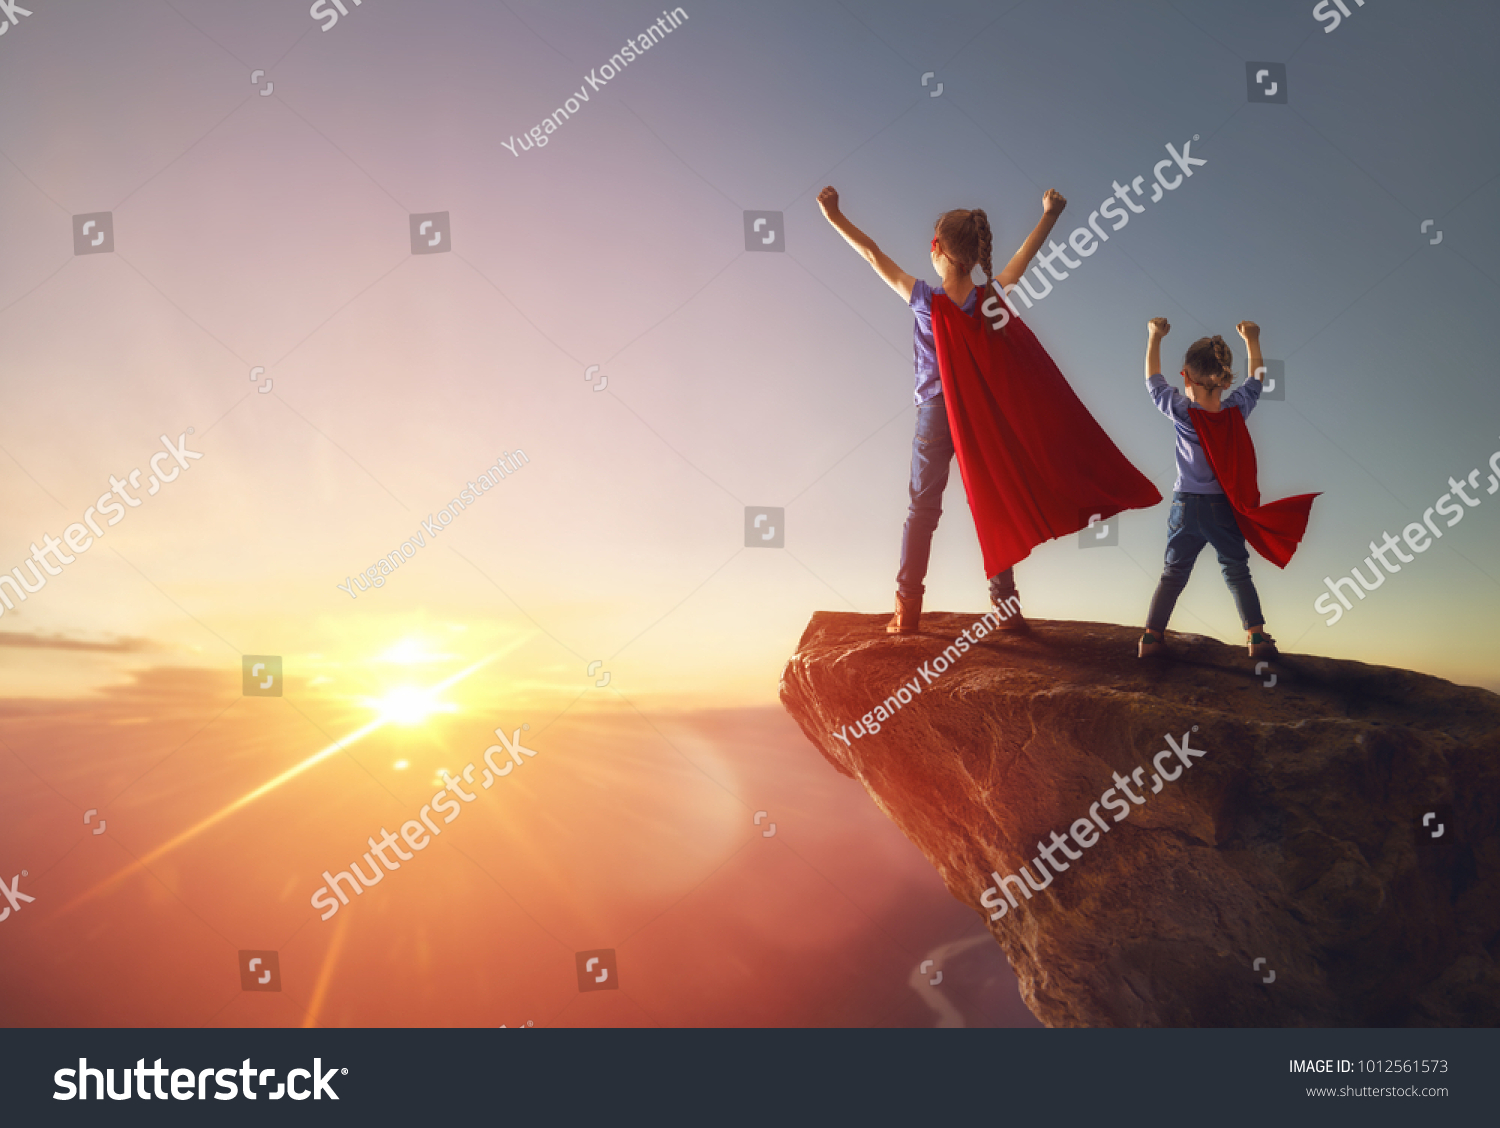 Two little children are playing superhero. Kids on the background of sunset sky. Girl power concept #1012561573